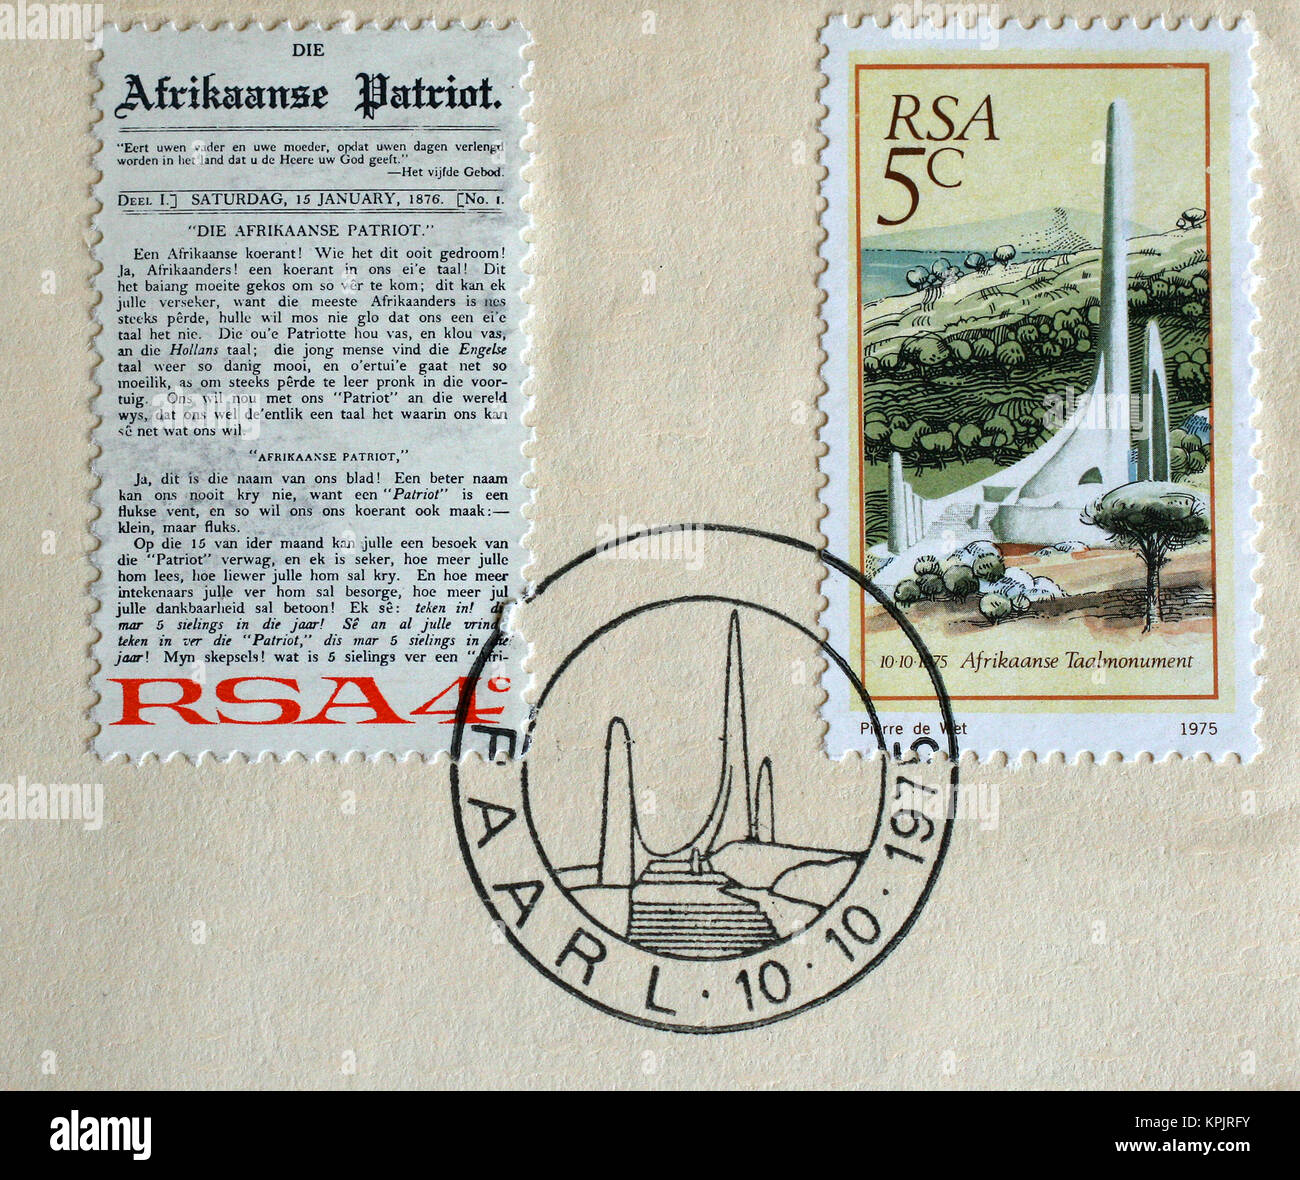 South African Paarl Taalmonument, 10/10/1975 postage stamp, South Africa. Stock Photo